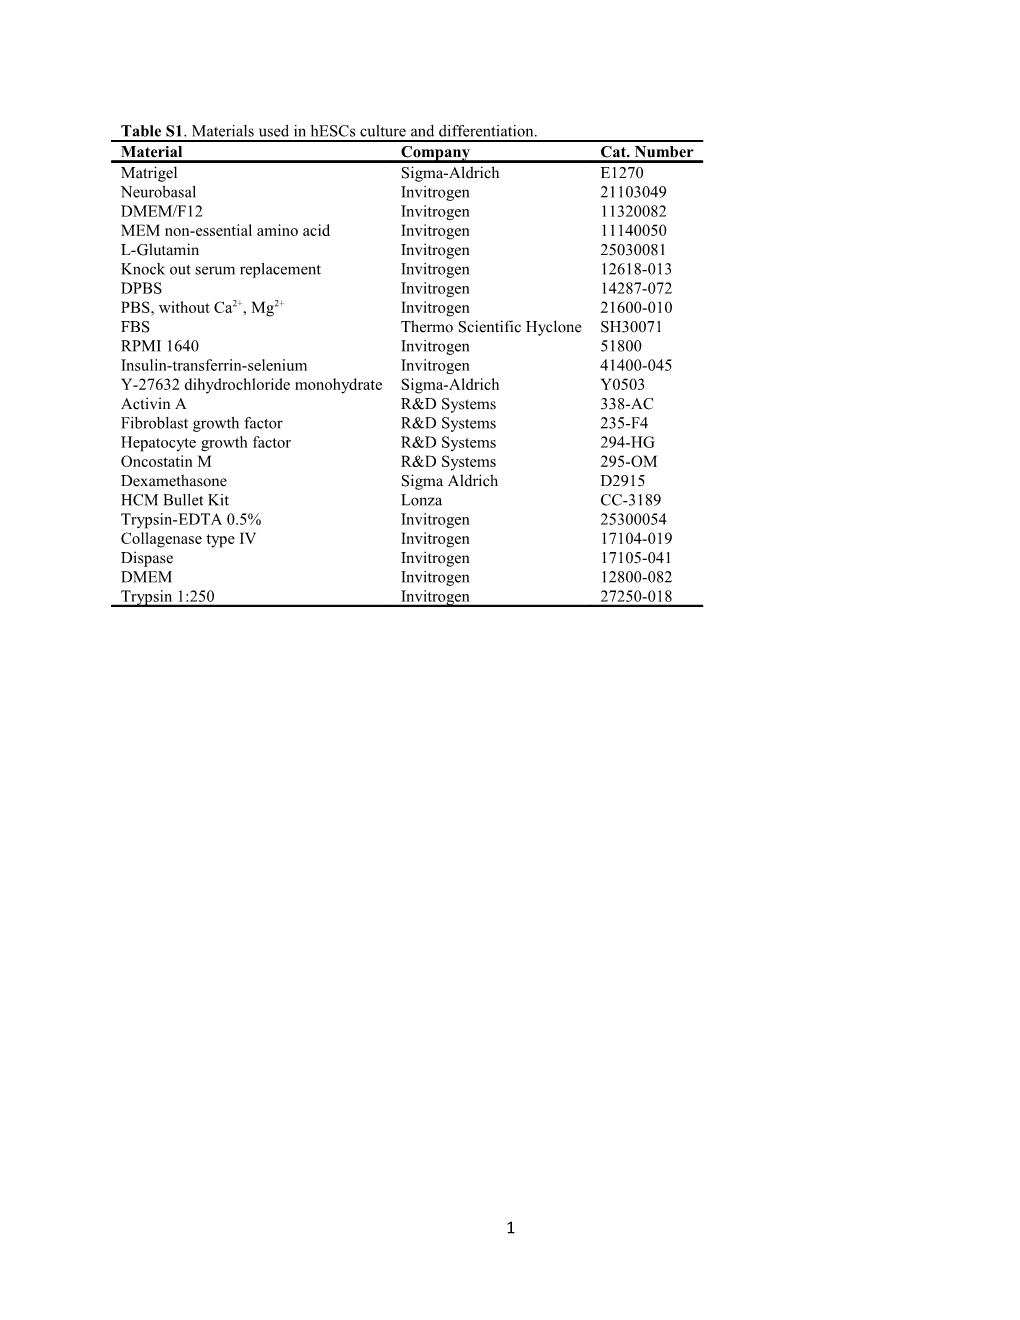 Table S1. Materials Used in Hescs Culture and Differentiation